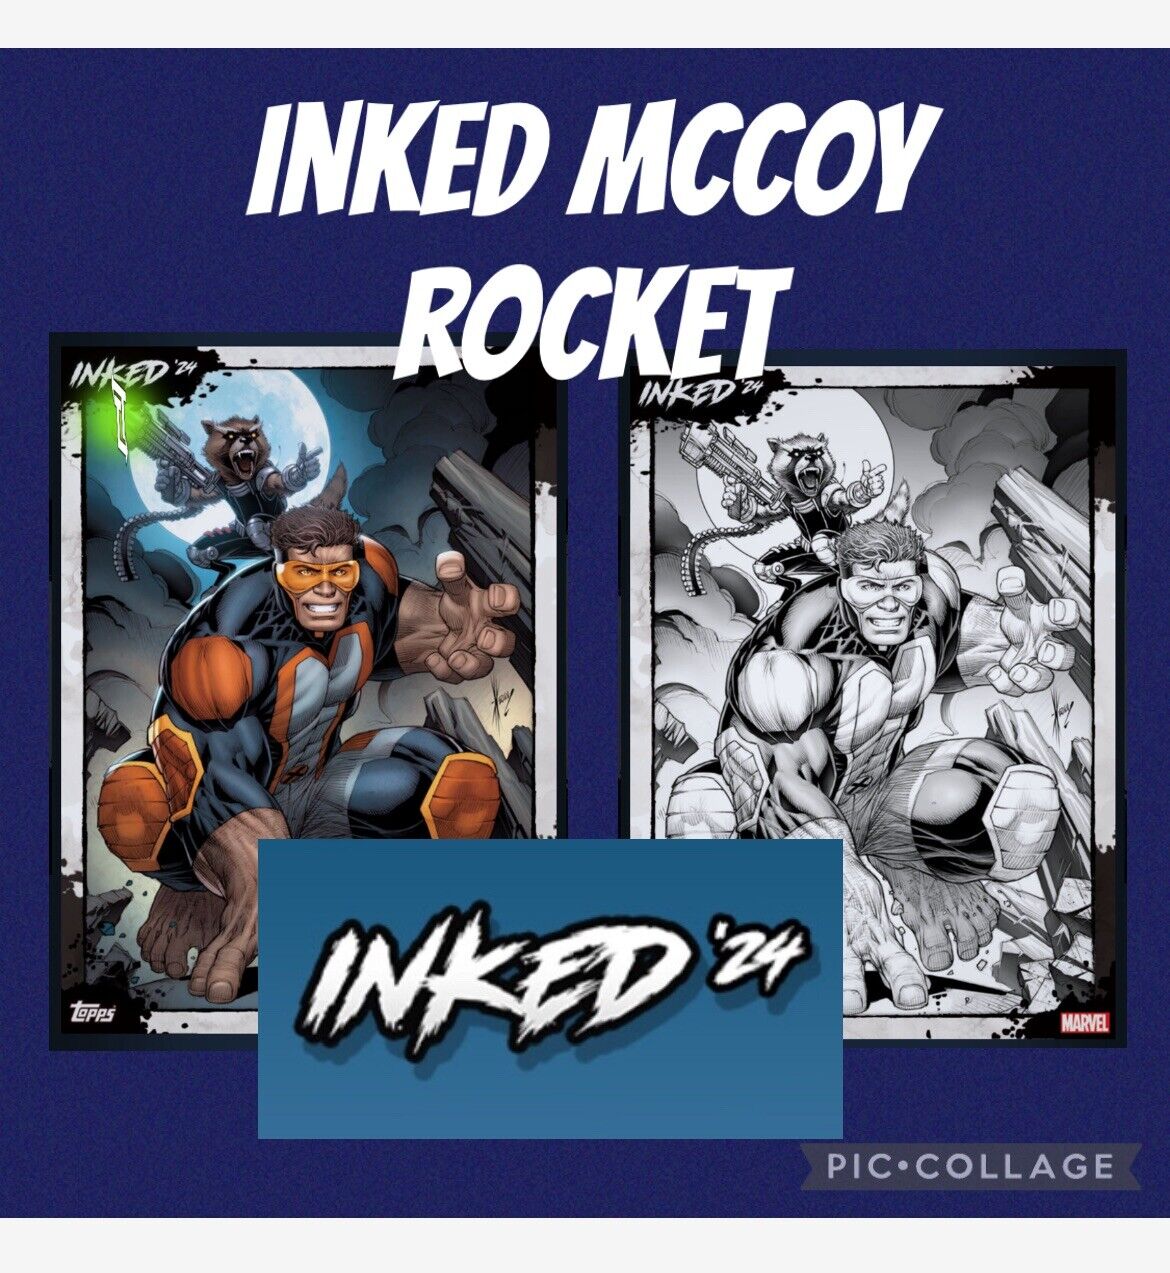 Topps Marvel Collect HANK MCCOY AND ROCKET INKED  1 color 1 b&w